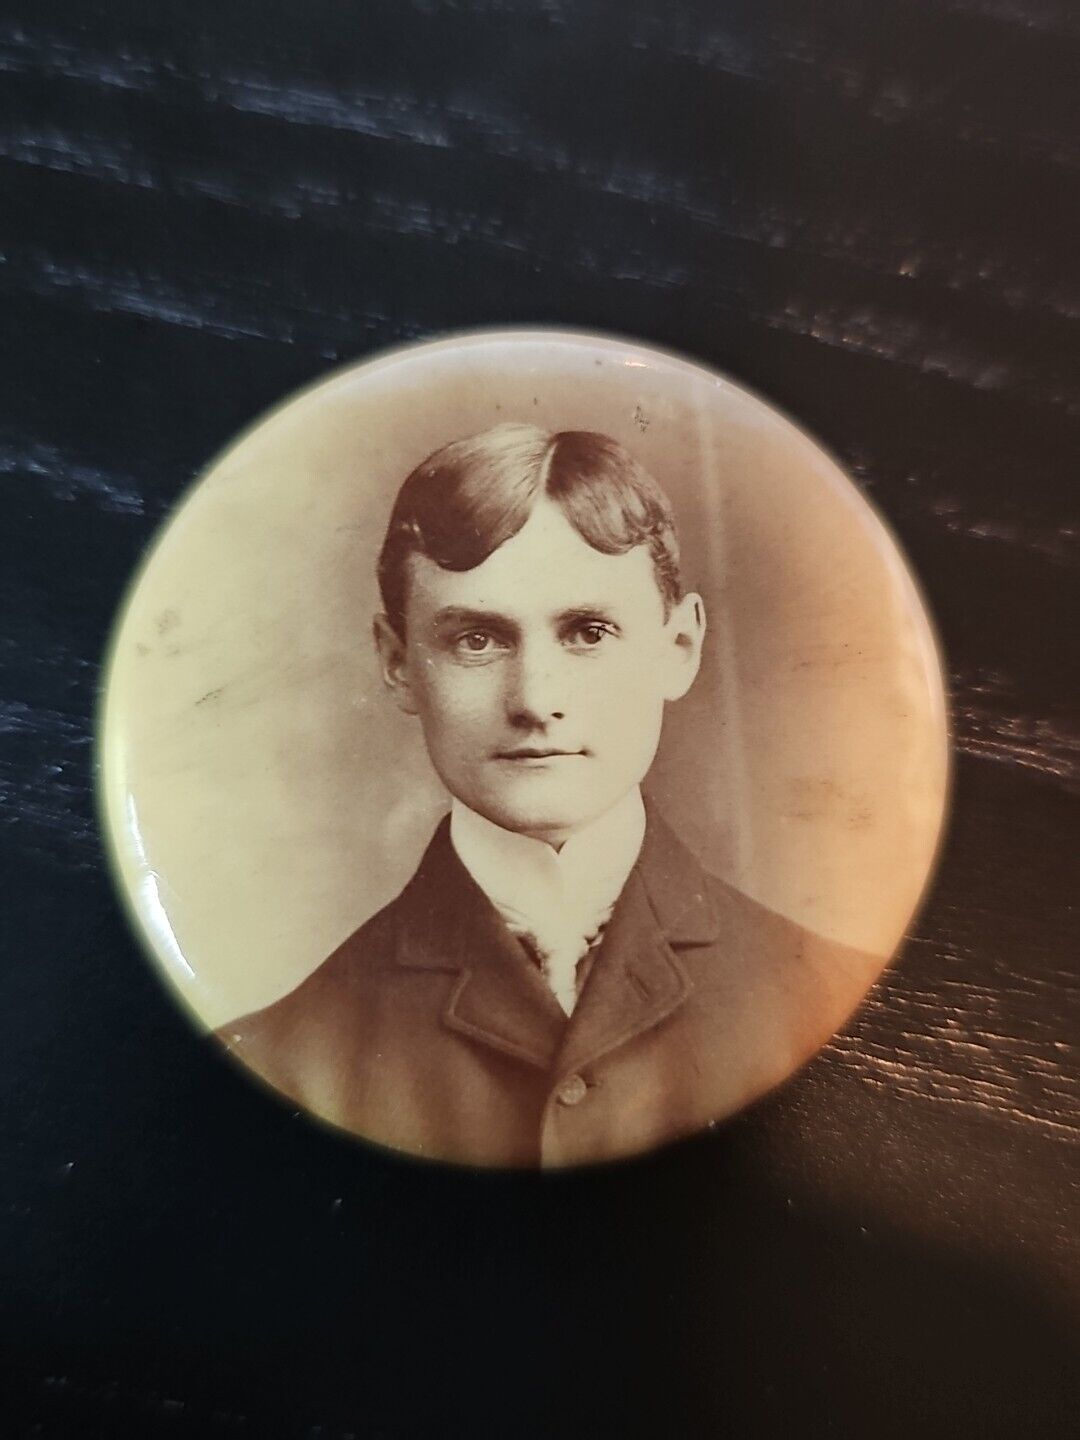 Antique Celluloid Photo Button Pendant 1900s Young Man Mourning Photo